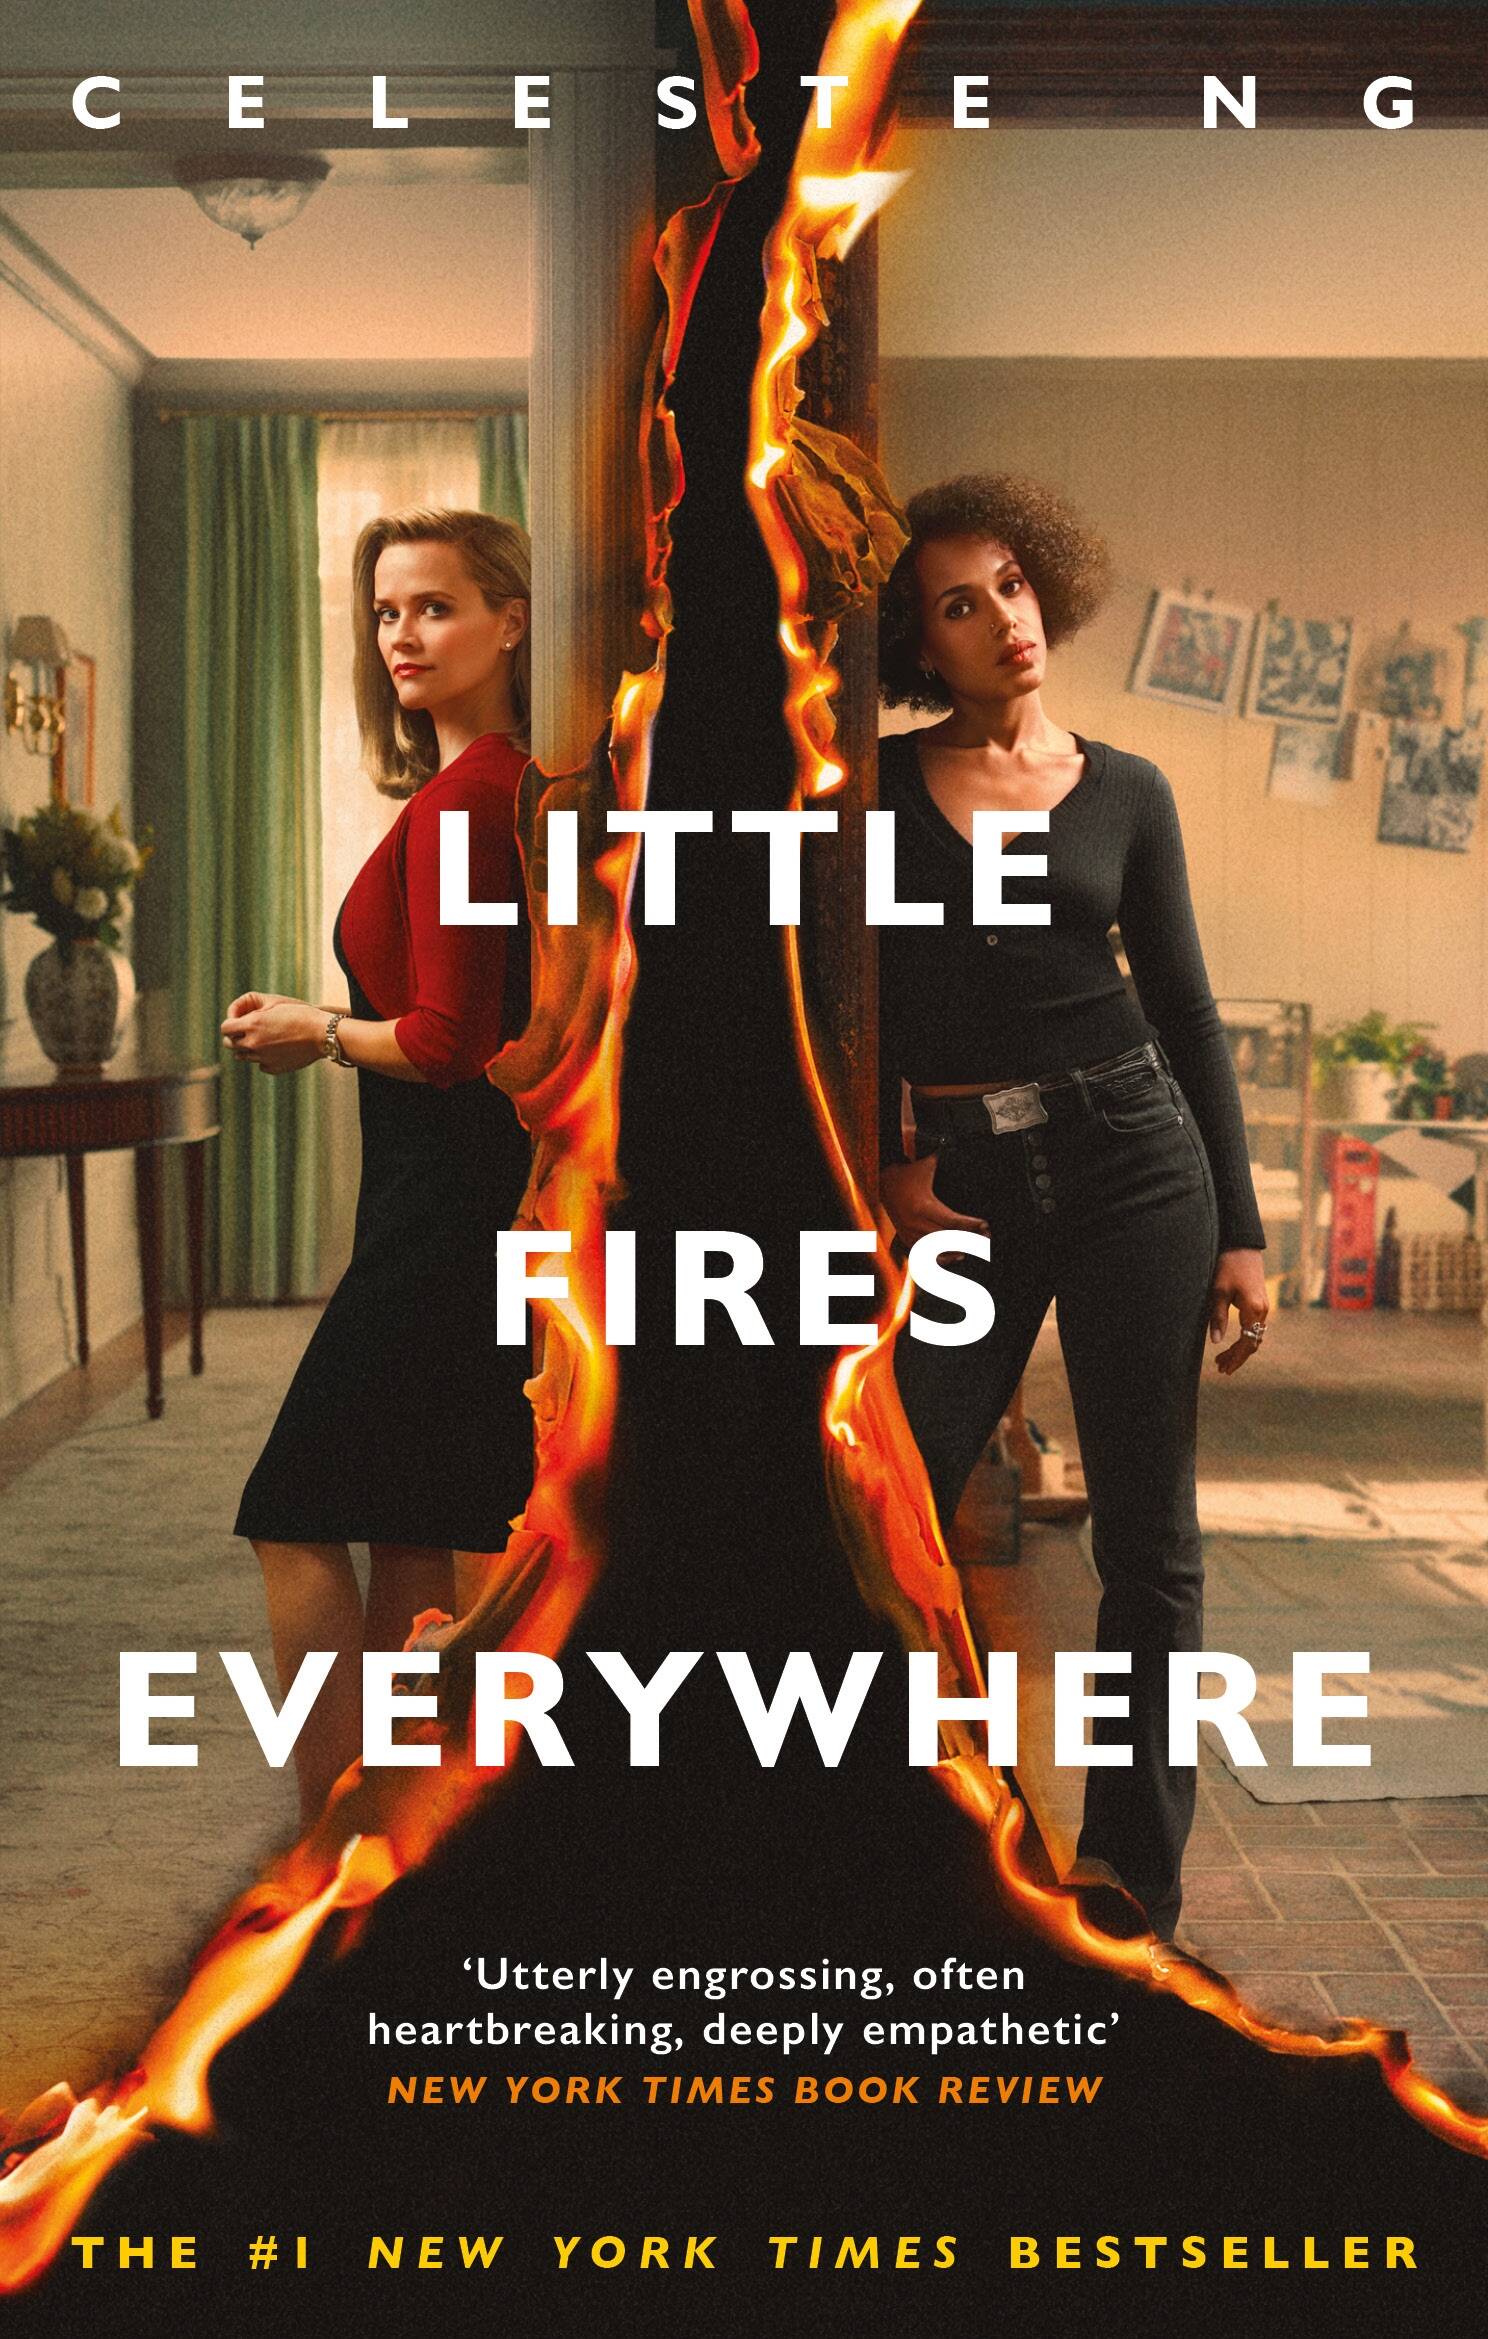 Little Fires Everywhere TV Tie In (Celeste Ng)      ( ) /   